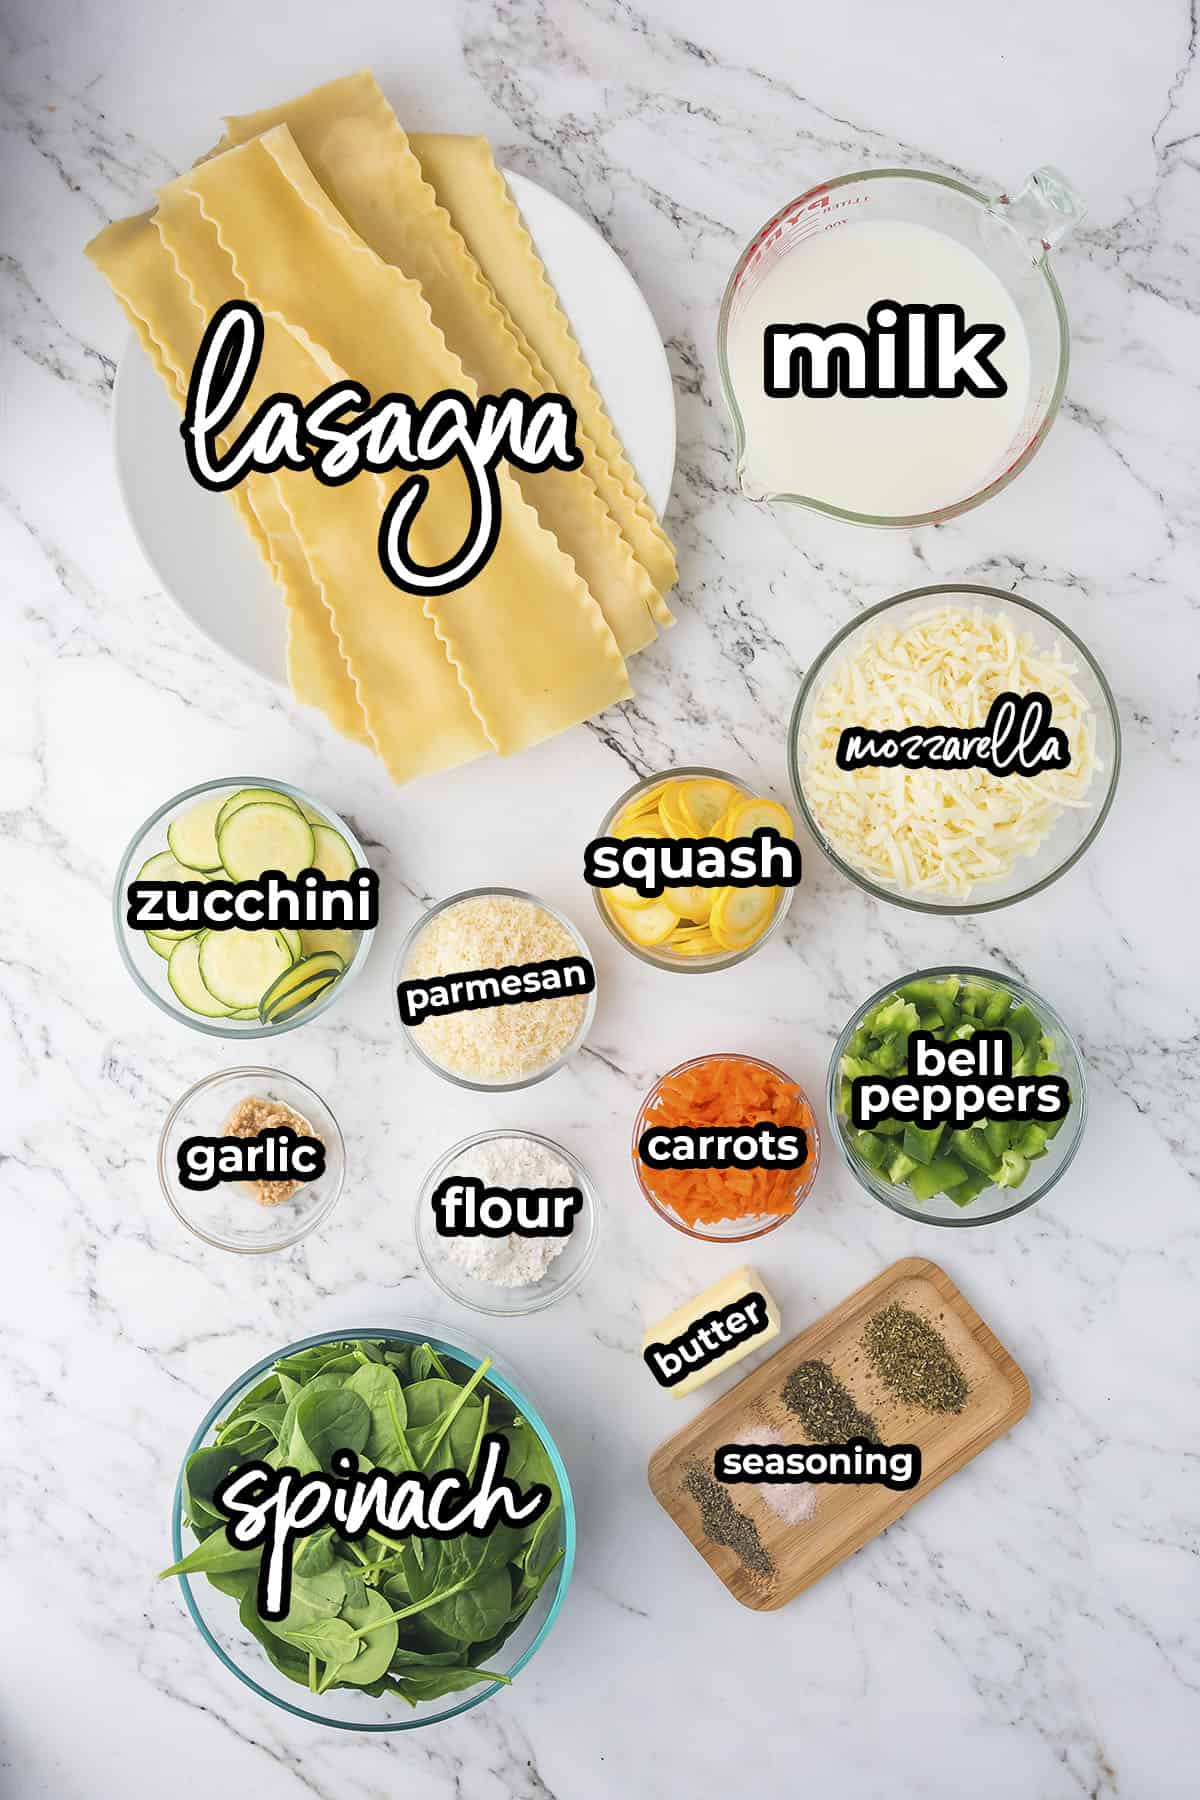 Ingredients for vegetable lasagna with white sauce.